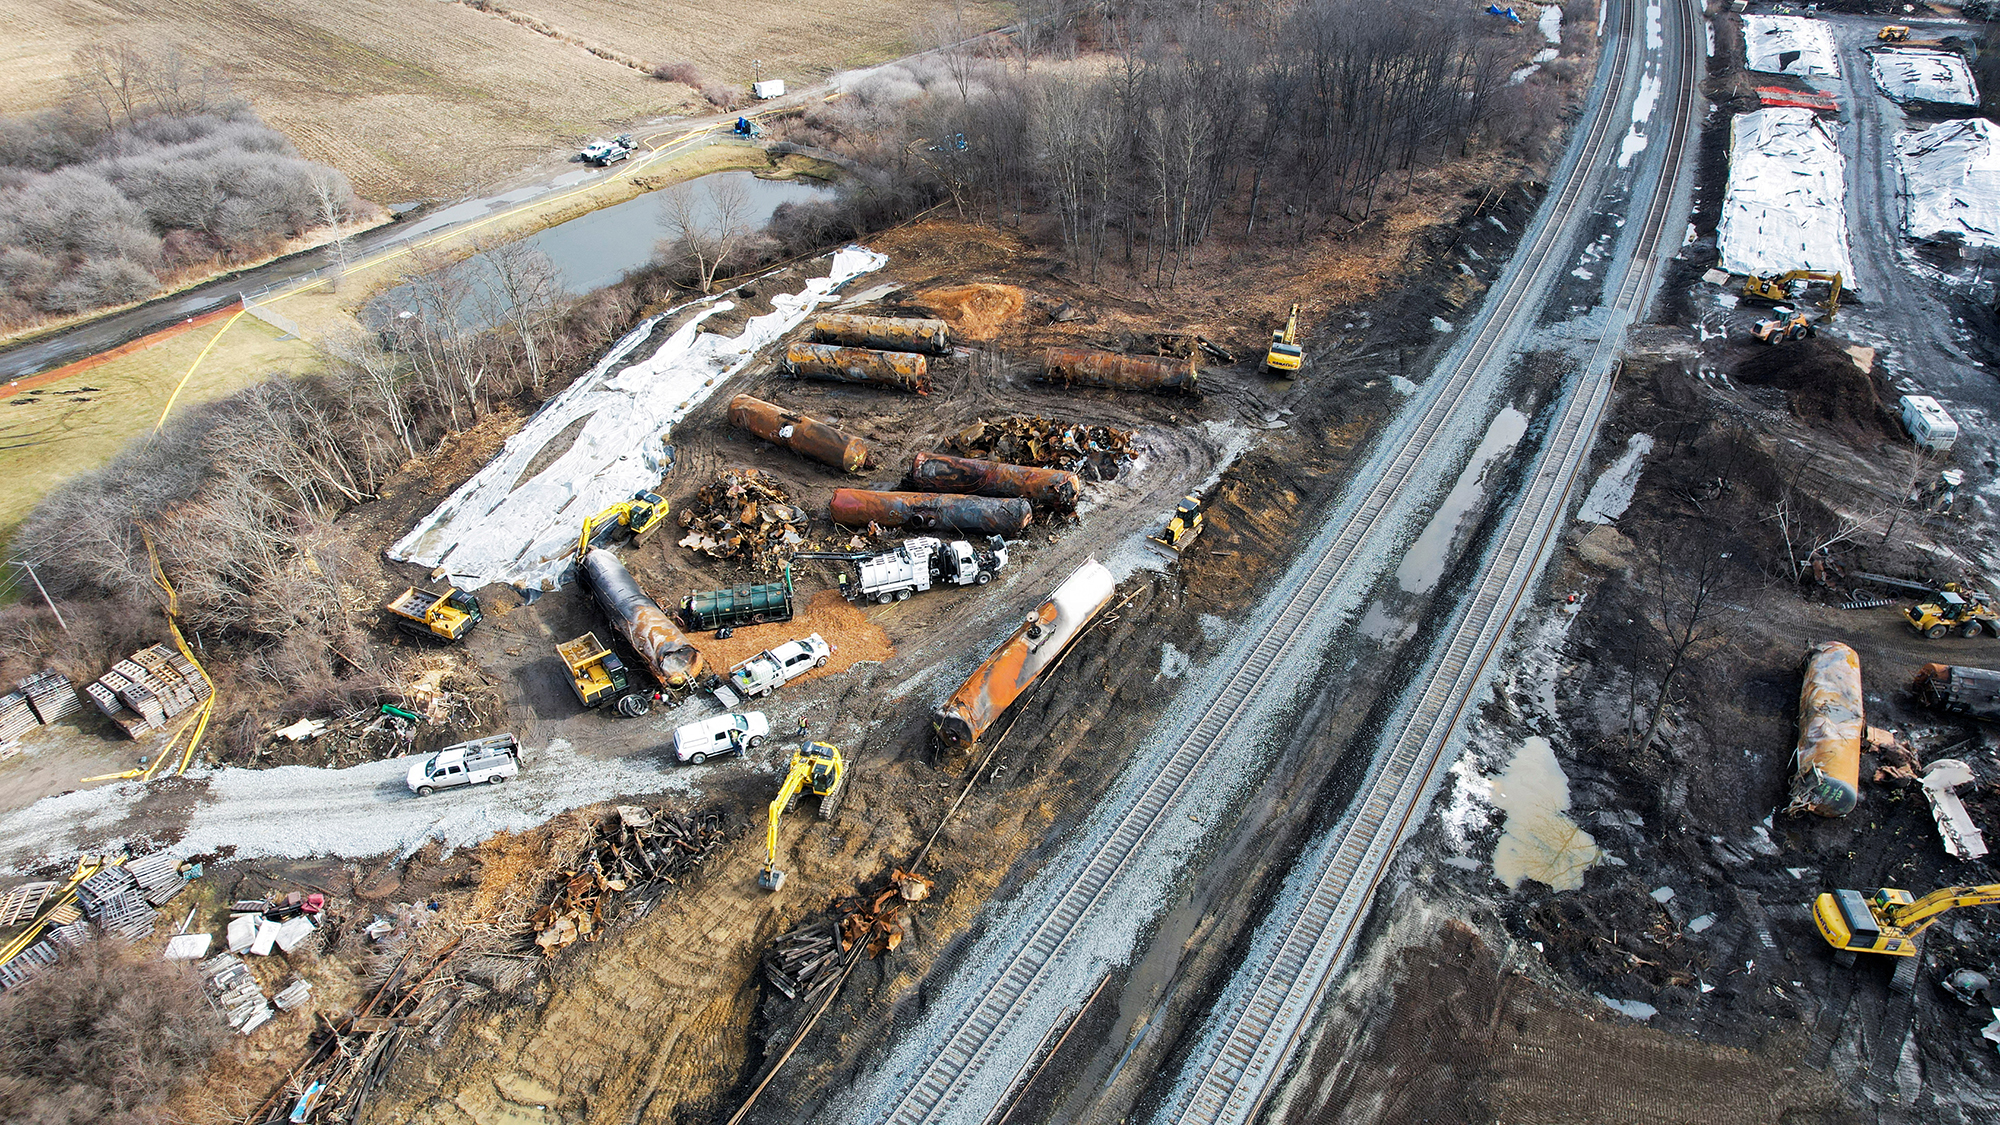 The aftermath of the toxic train wreck in Ohio keeps spreading to more states as scientists say tes...